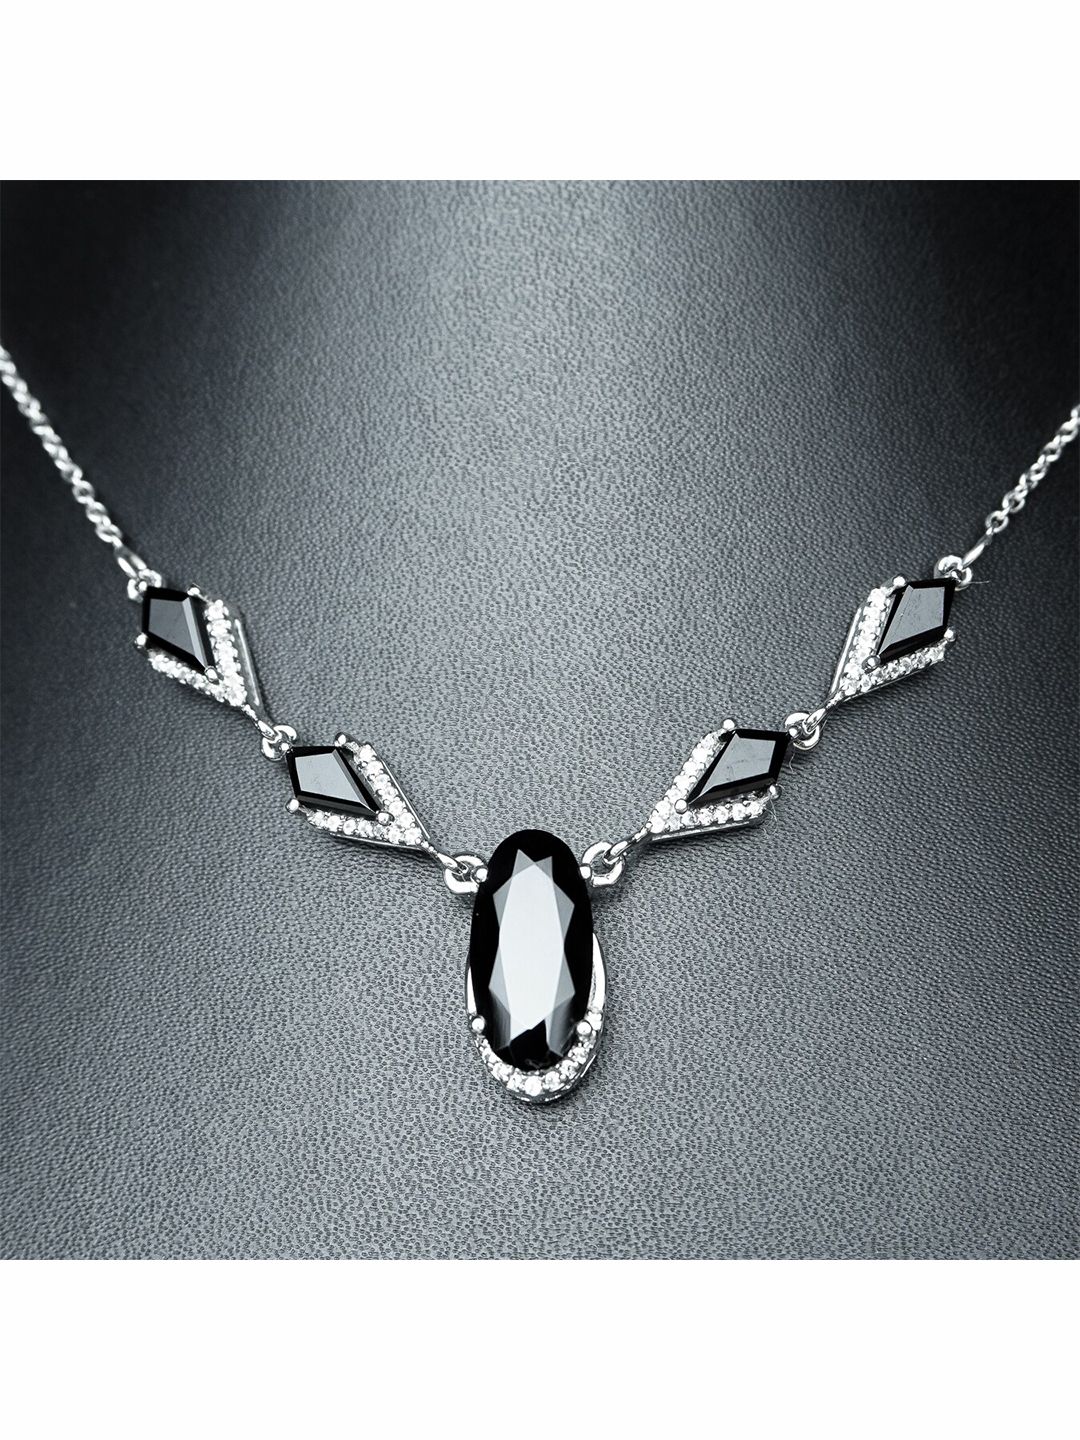 HIFLYER JEWELS Black & Silver-Toned Rhodium-Plated Stone-Studded Necklace Price in India